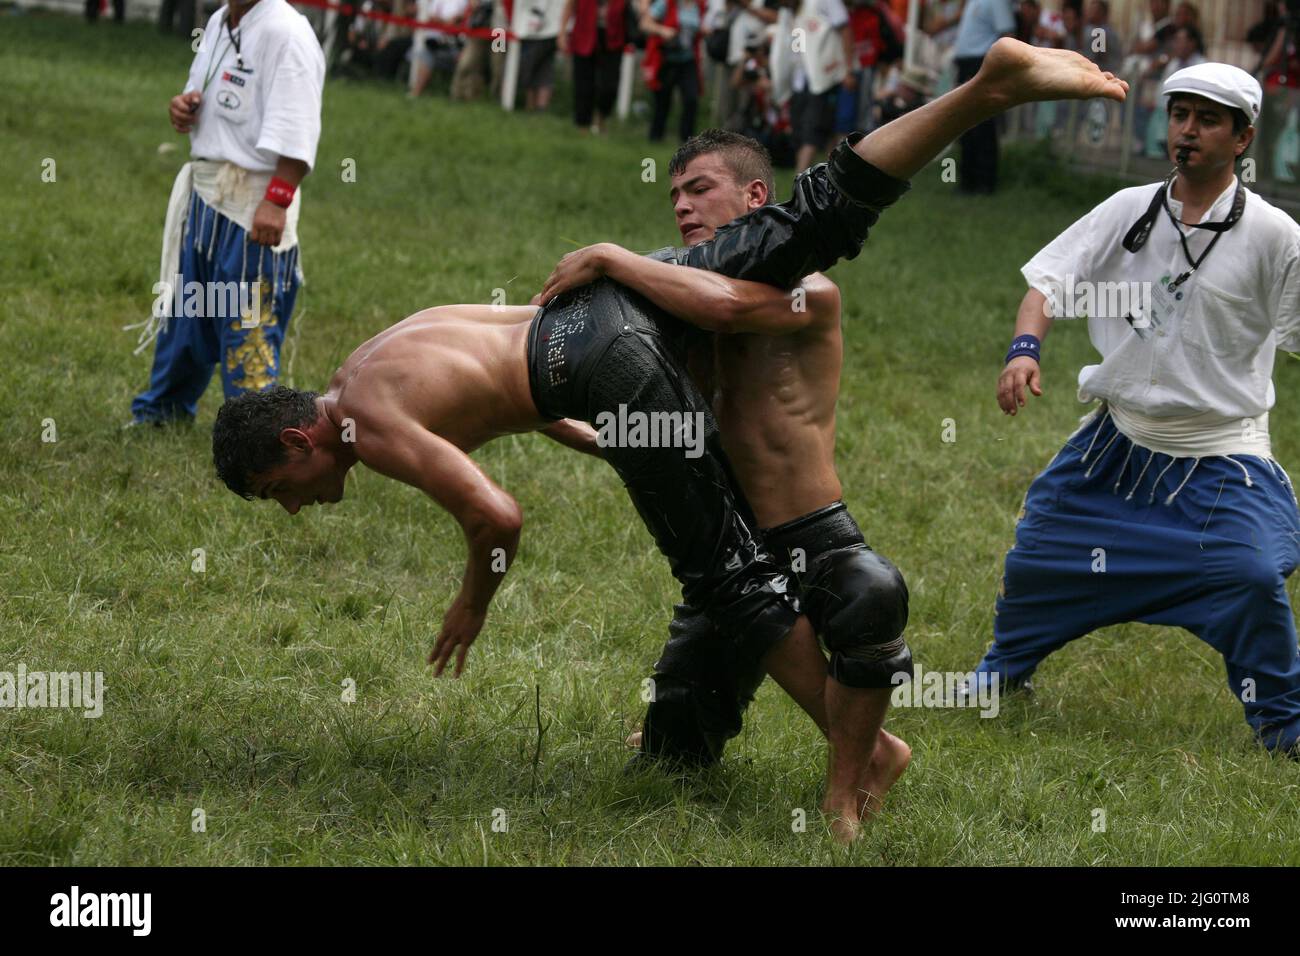 Kırkpınar (Turkish Oil Wrestling). Wrestlers fight during the 648th Kırkpınar Tournament in Edirne, Turkey, on 4 July 2009. Kırkpınar wrestlers compete stripped to the waist and smeared their bodies with olive oil. Wrestlers wear only black leather trousers called kisbet. The name of the wrestler is embossed by metal rivets behind. The oiled body is extremely slippery, and the only reliable way to capture an opponent is push an arm through the kisbet and grab the other end of the leg. Stock Photo